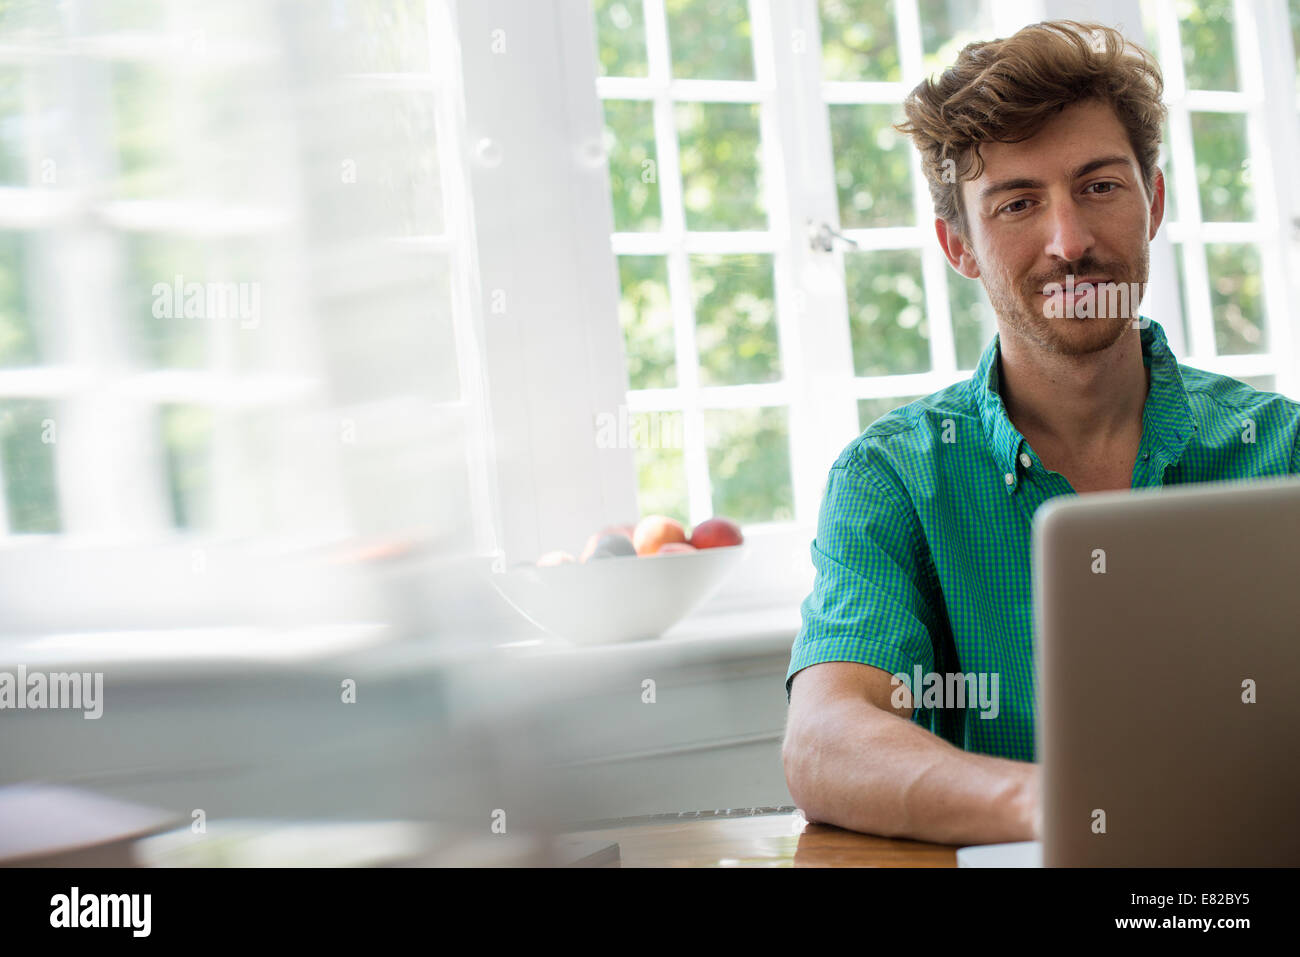 A man seated at a table using a laptop. Working from home. Stock Photo